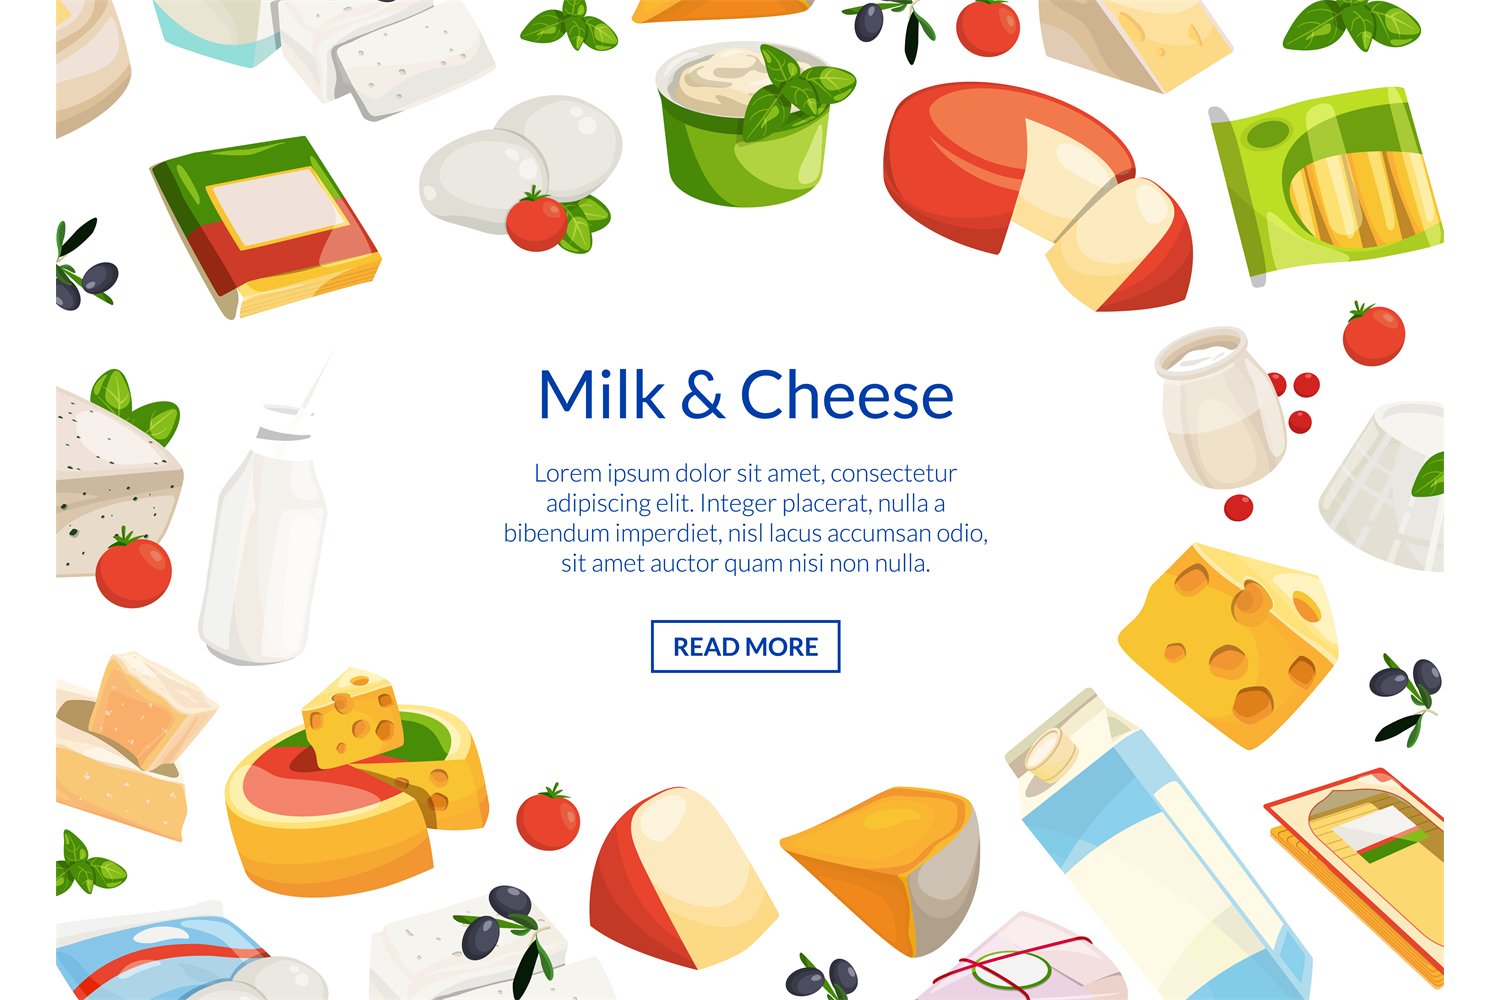 Colorful background image of milk and different types of cheese.